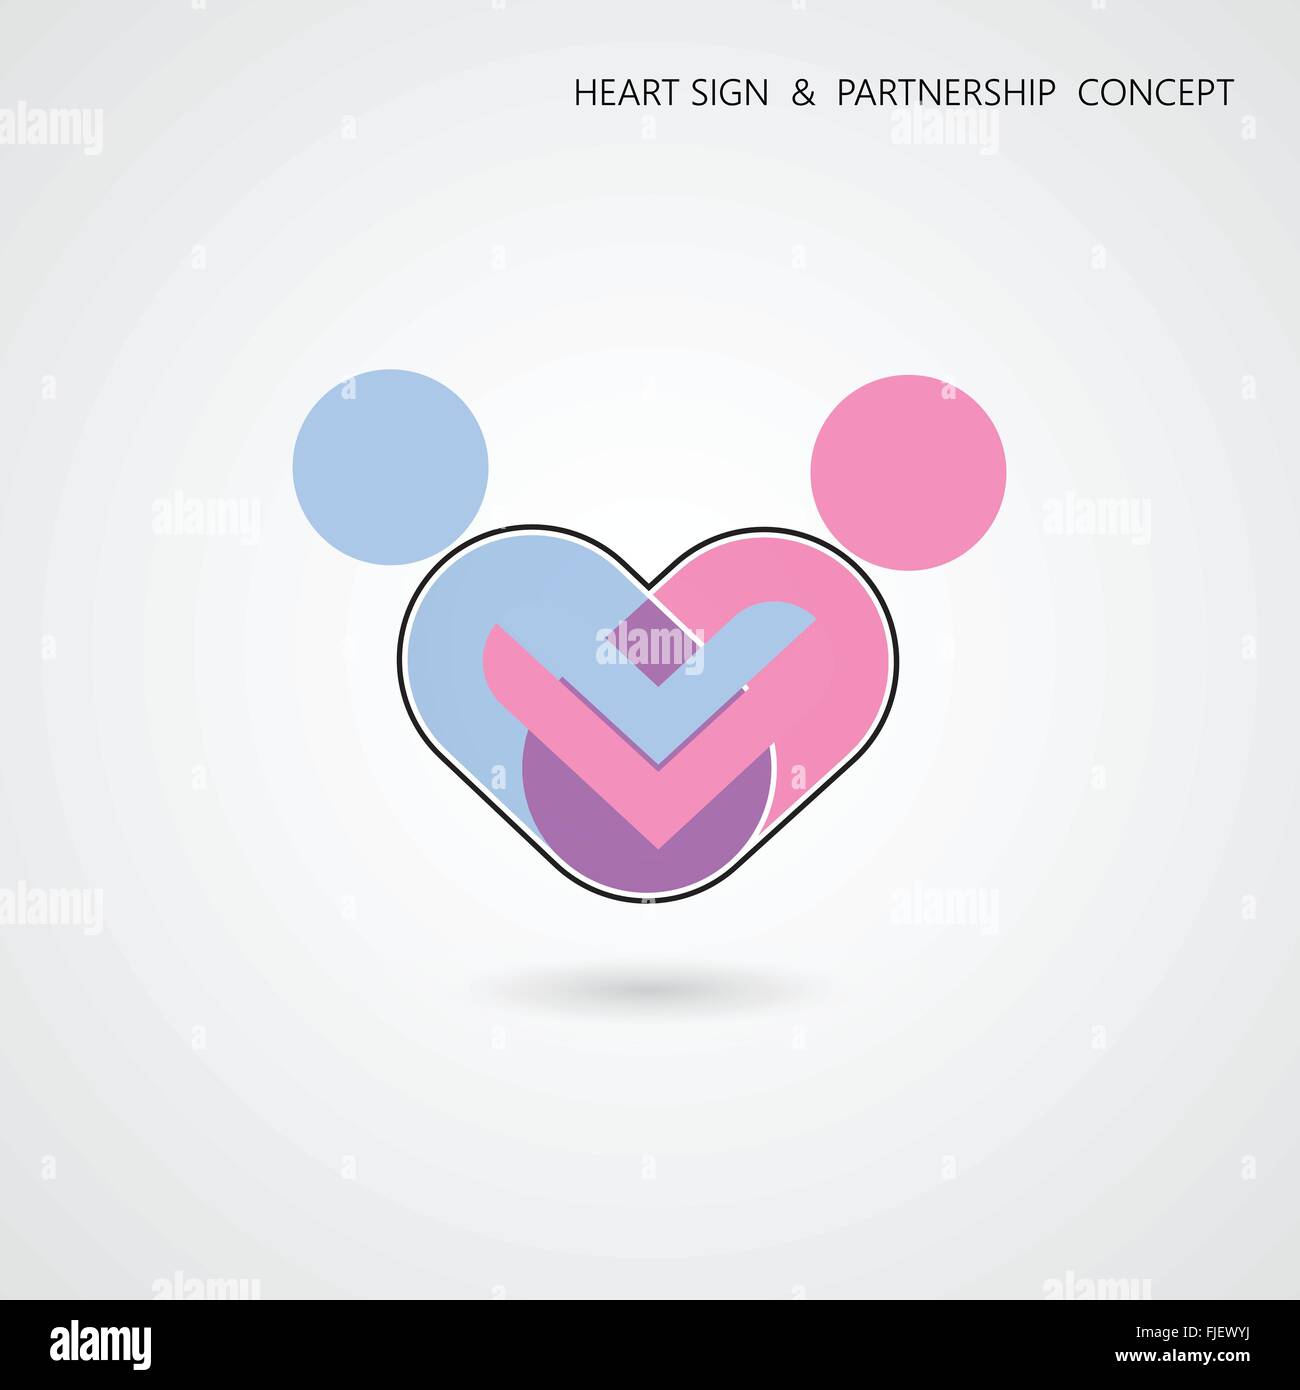 Creative heart shape and human symbol with business concept. Teamwork sign. Partnership and cooperation concept Stock Vector